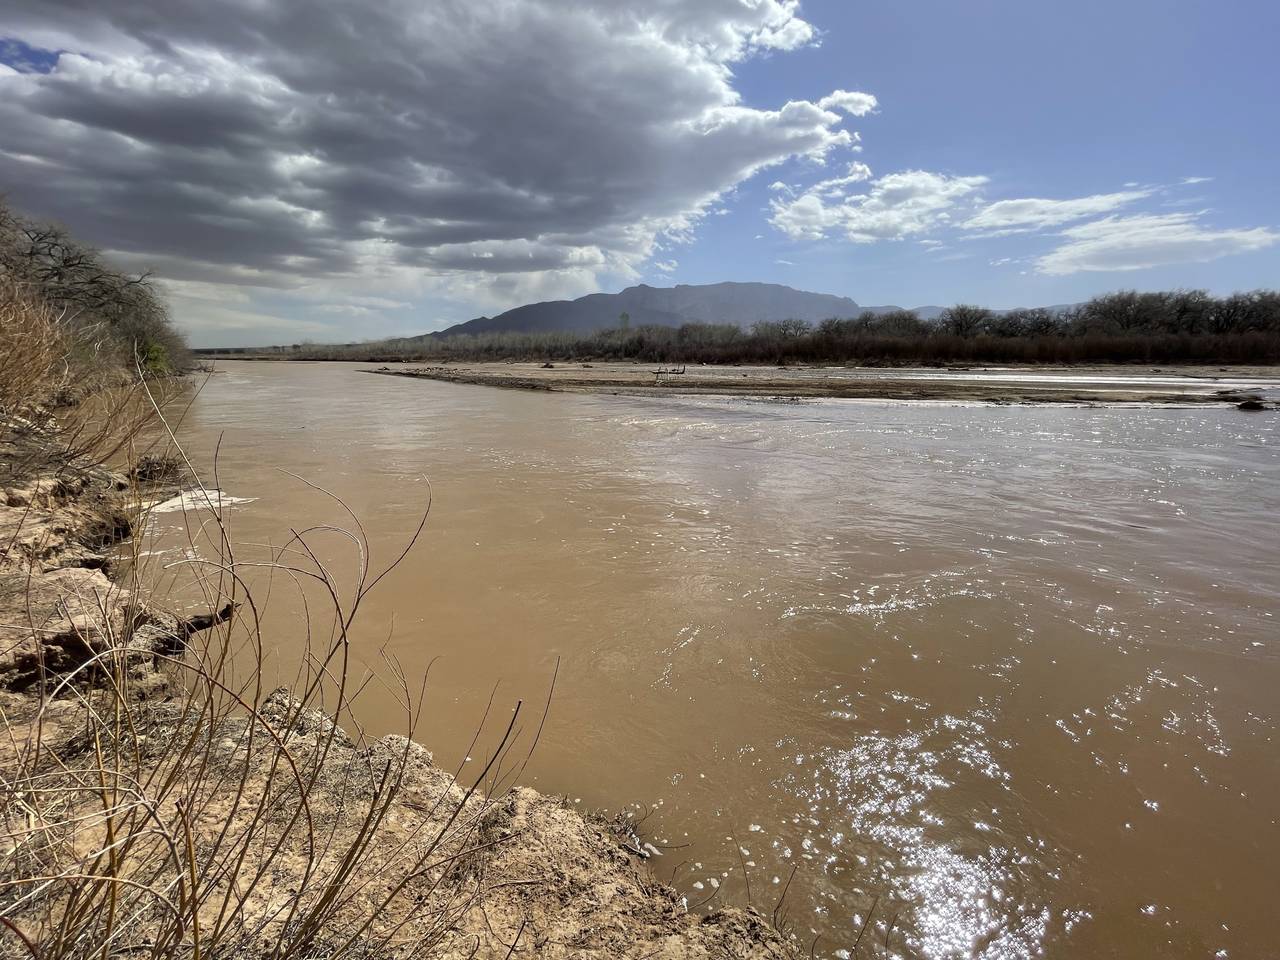 This April 10, 2022 image shows the Rio Grande flowing just north of Albuquerque, N.M. State and re...